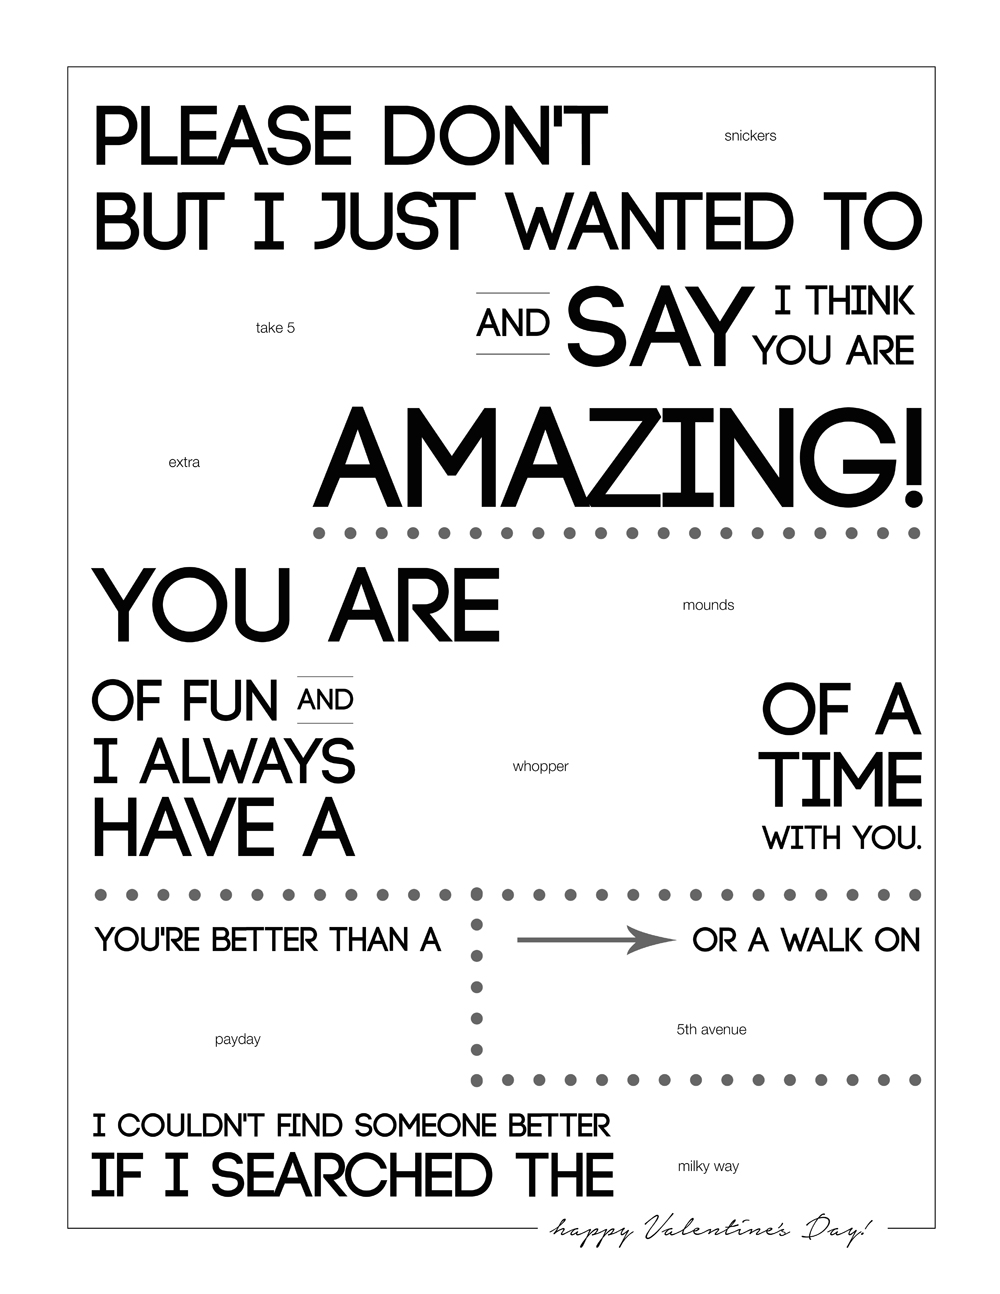 Printable candygram for Valentine\'s day: poster with spaces left for candy bars instead of some words